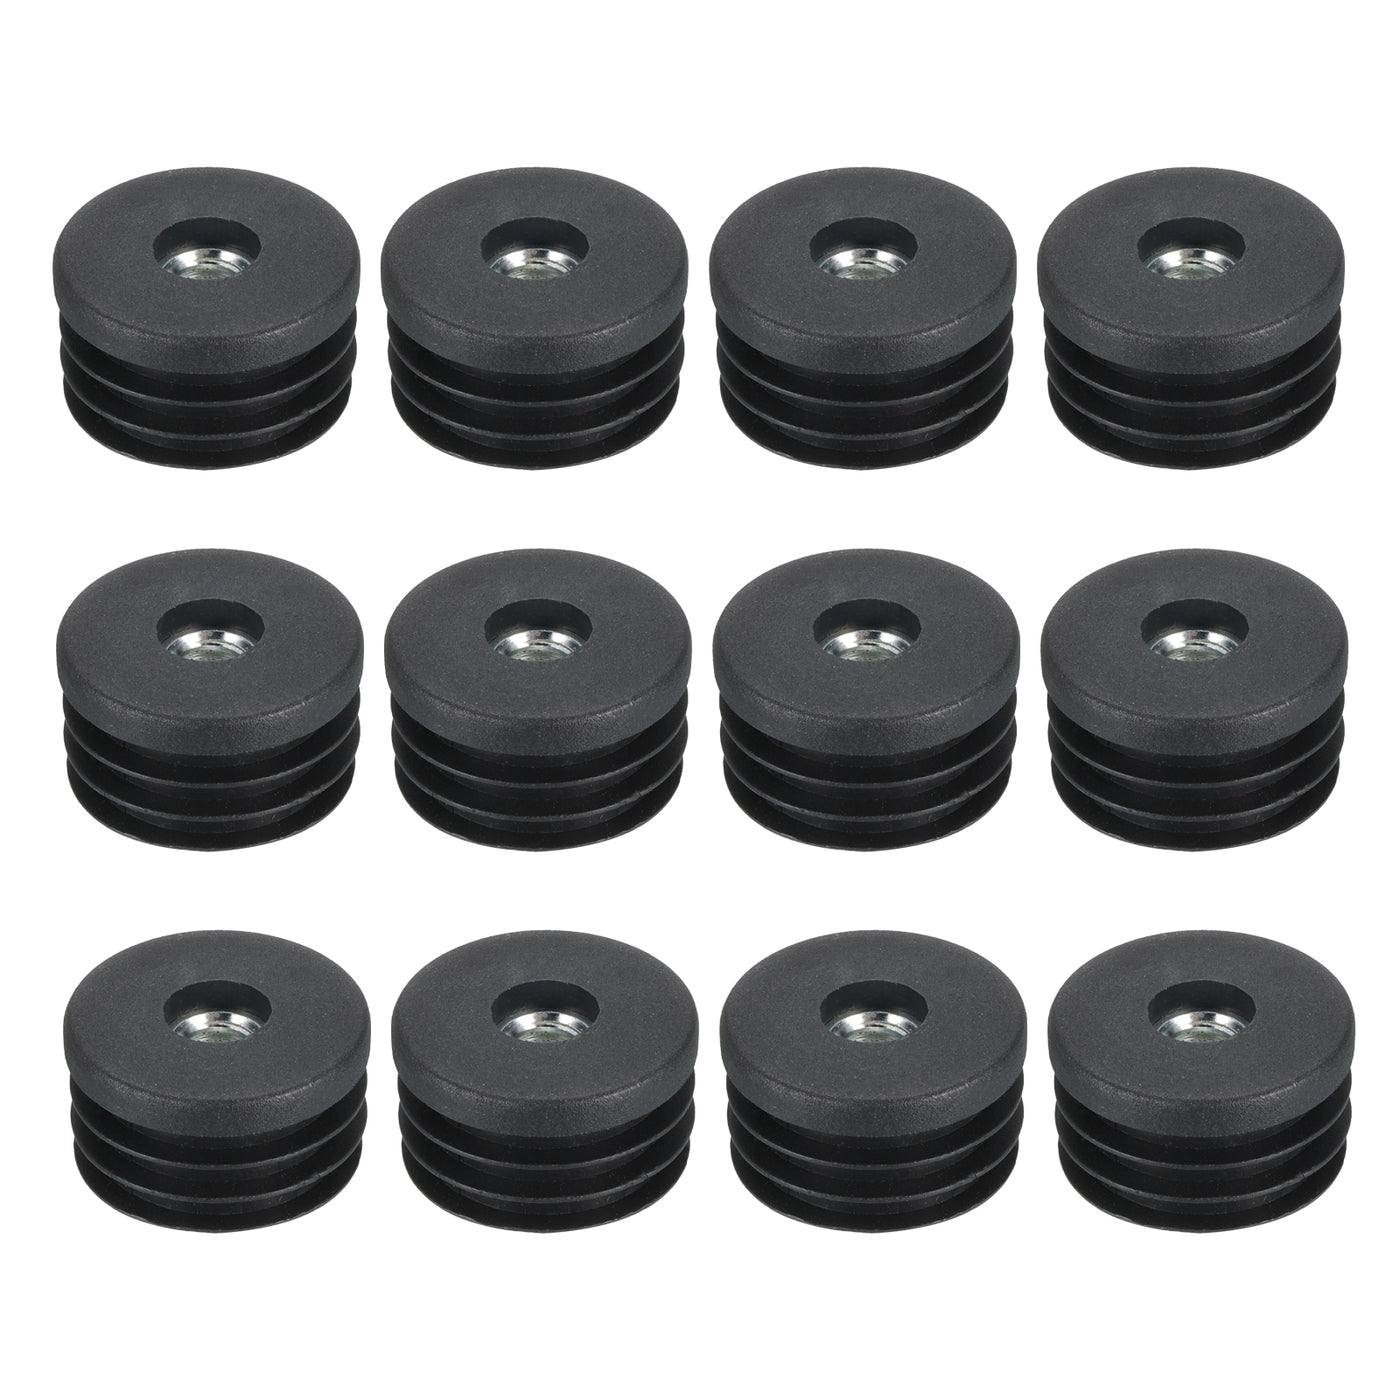 uxcell Uxcell 12Pcs Caster Insert with Thread, 30mm/1.18" M8 Thread for Furniture